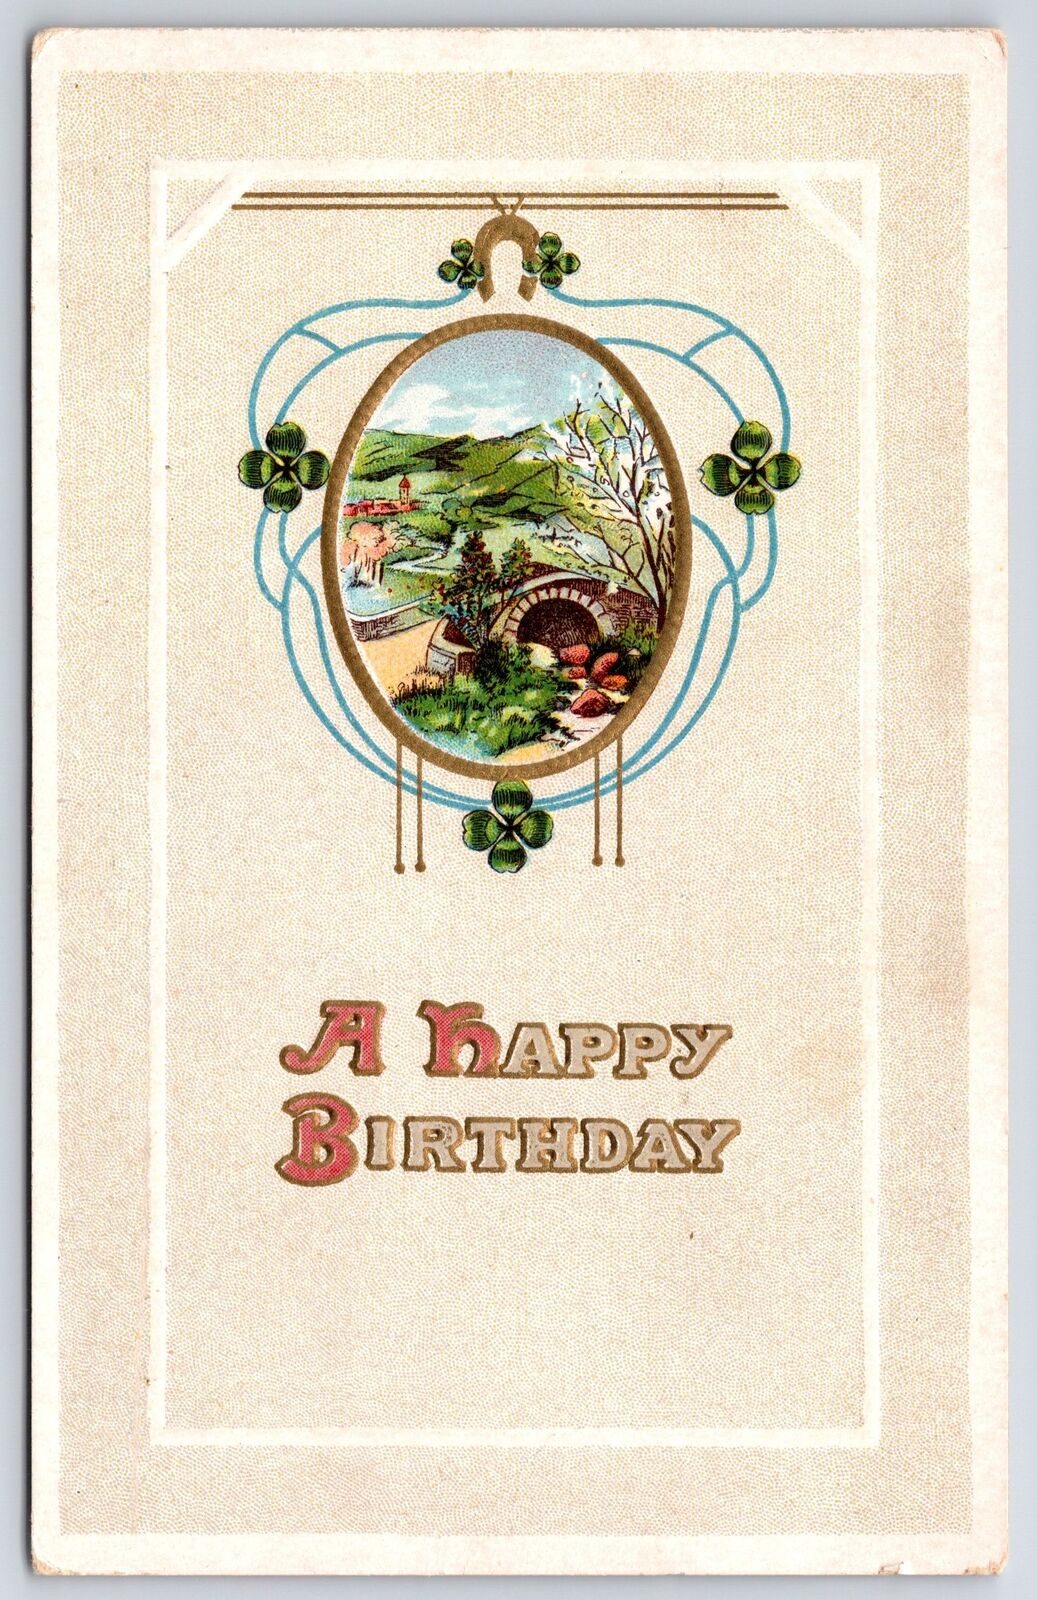 Happy Birthday Landscape Bordered Greetings Wishes Card Postcard